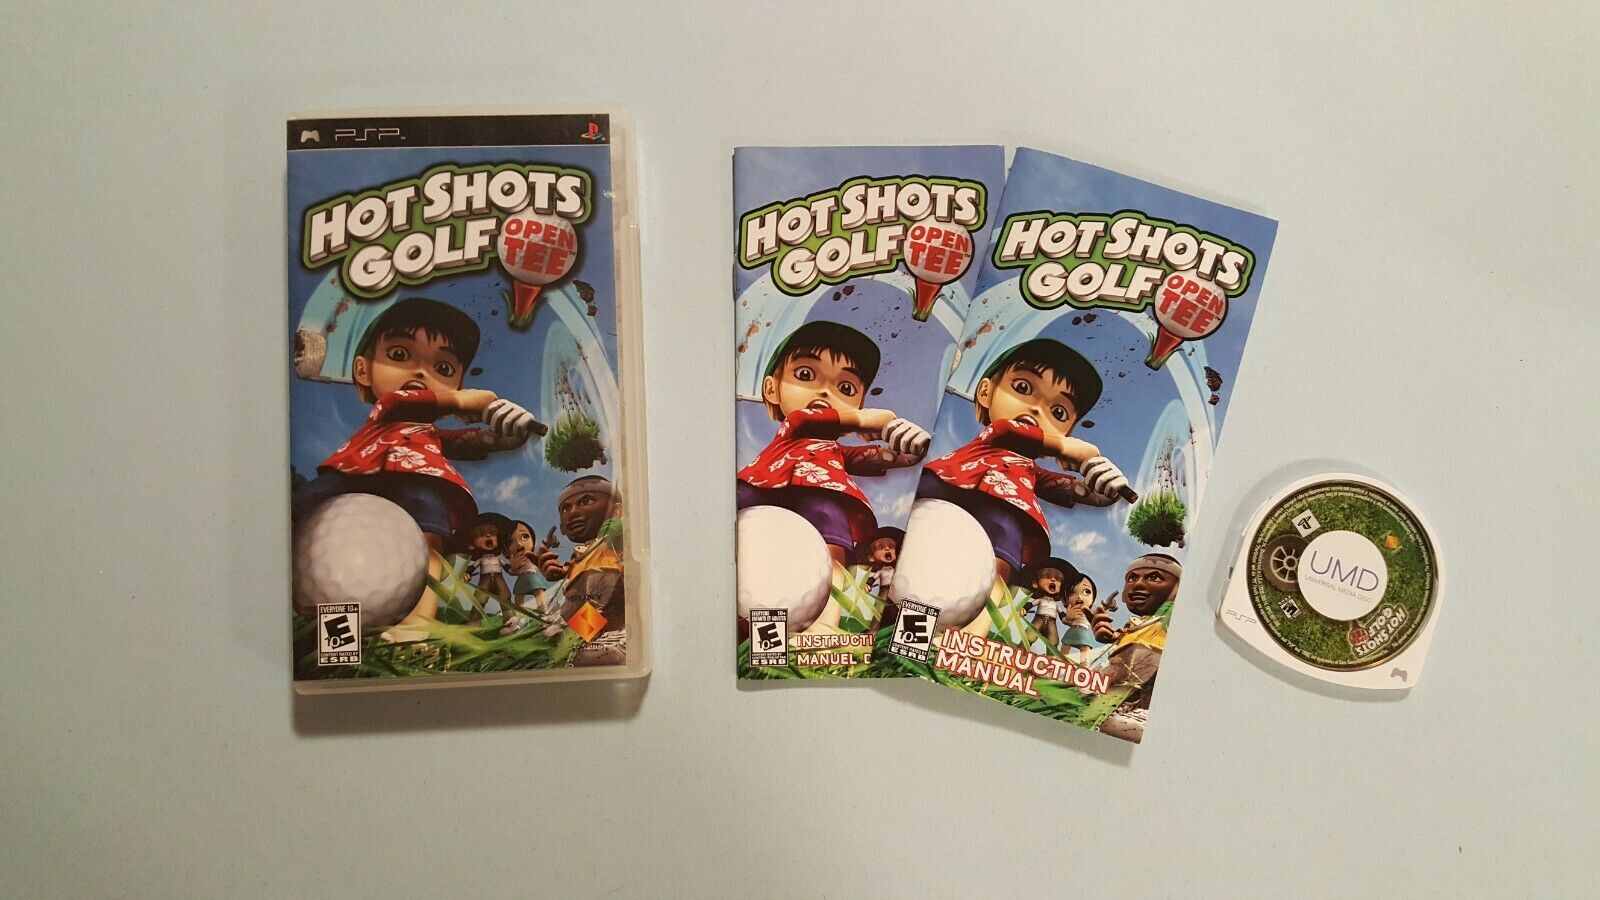 Primary image for Hot Shots Golf: Open Tee (Sony PSP, 2005)